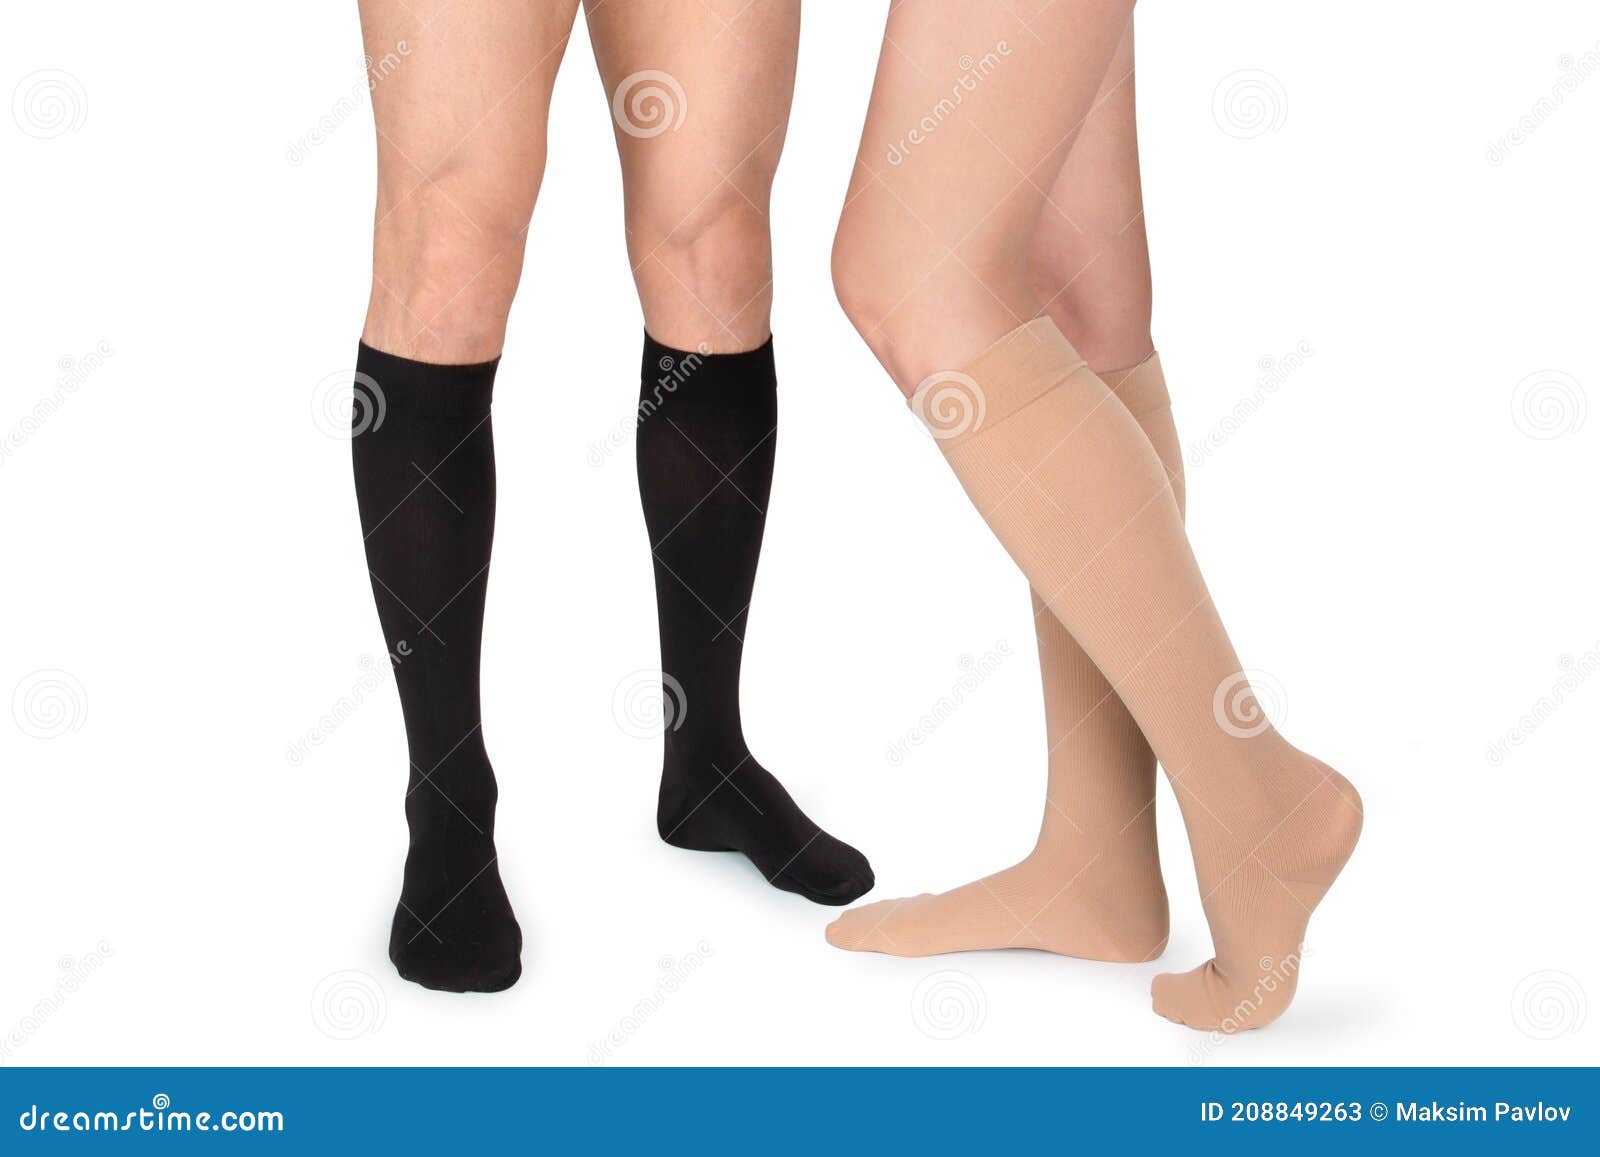 https://thumbs.dreamstime.com/z/compression-hosiery-medical-stockings-tights-varicose-veins-venouse-therapy-socks-man-women-clinical-knits-comfort-208849263.jpg